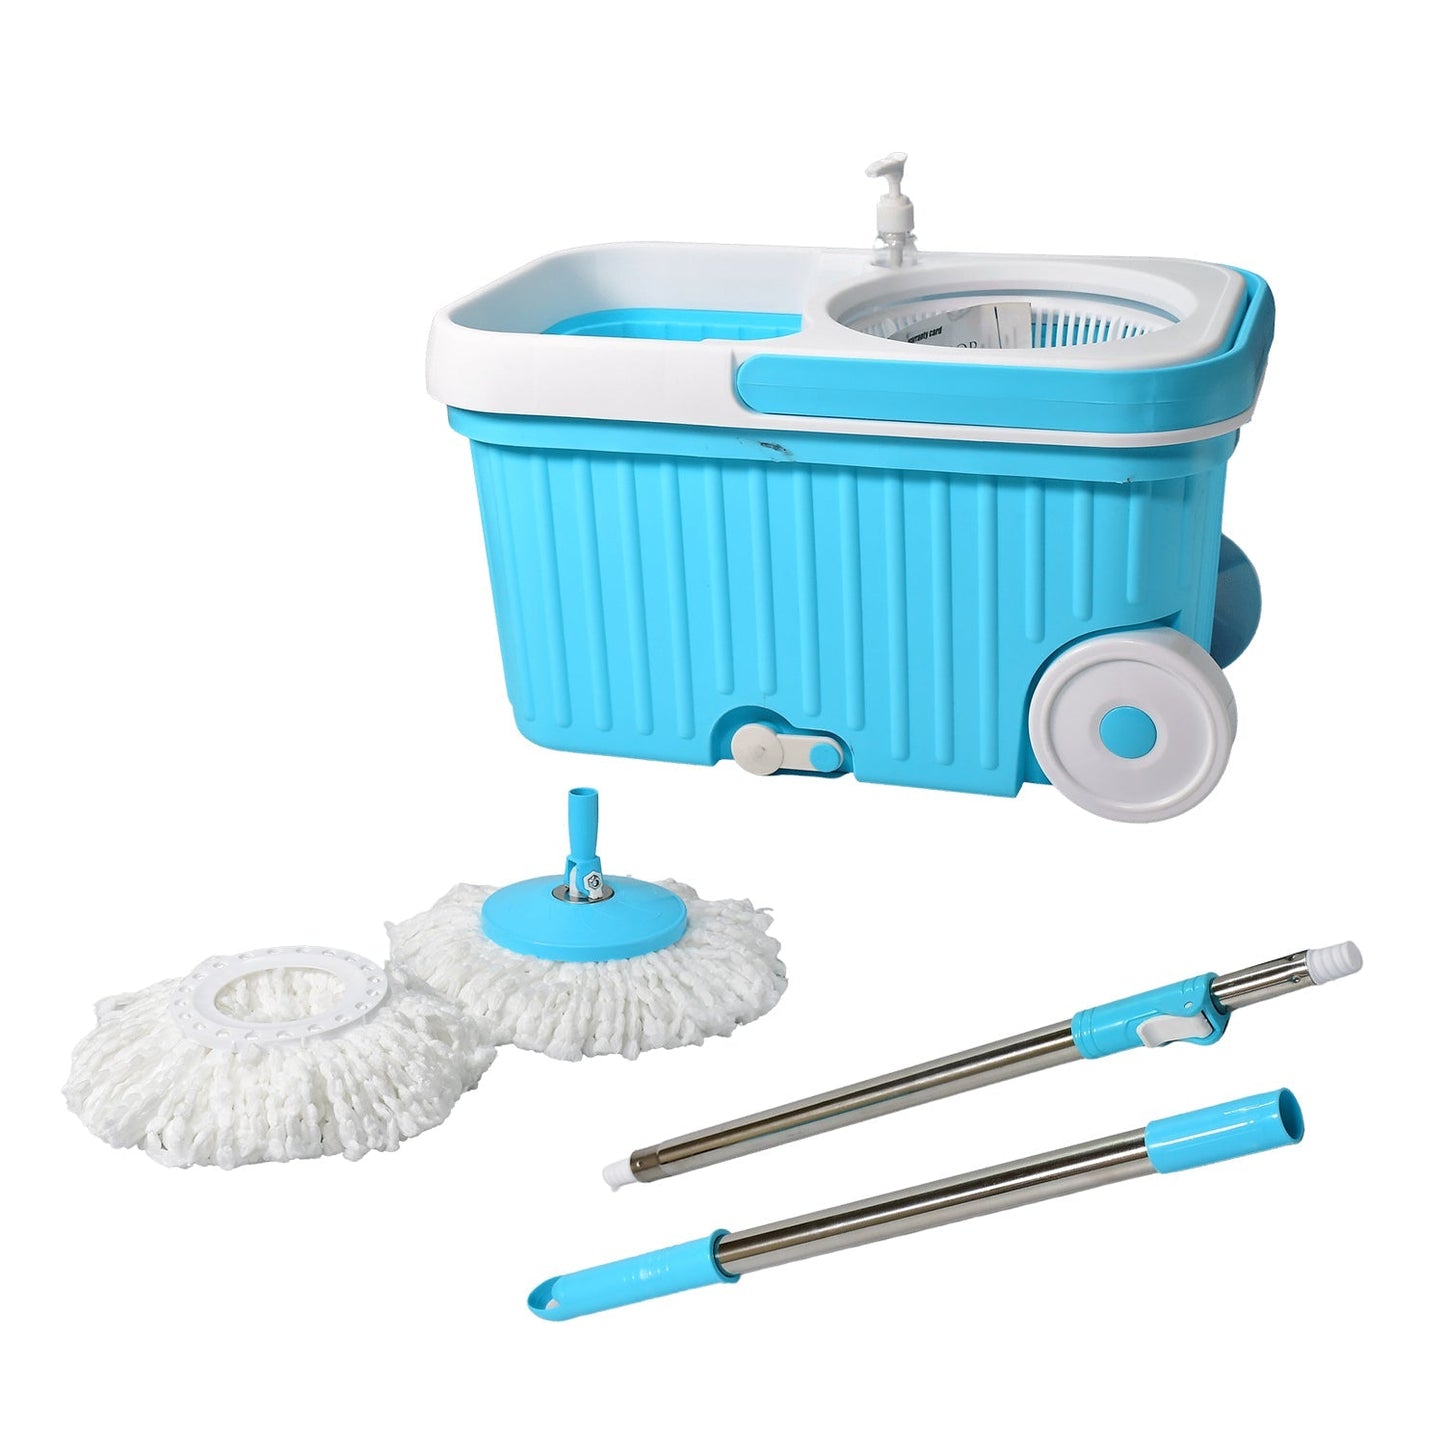 8712 Sporty Plastic Spin Mop with Bigger Wheels and Plastic Auto Fold Handle for 360 Degree Cleaning. DeoDap